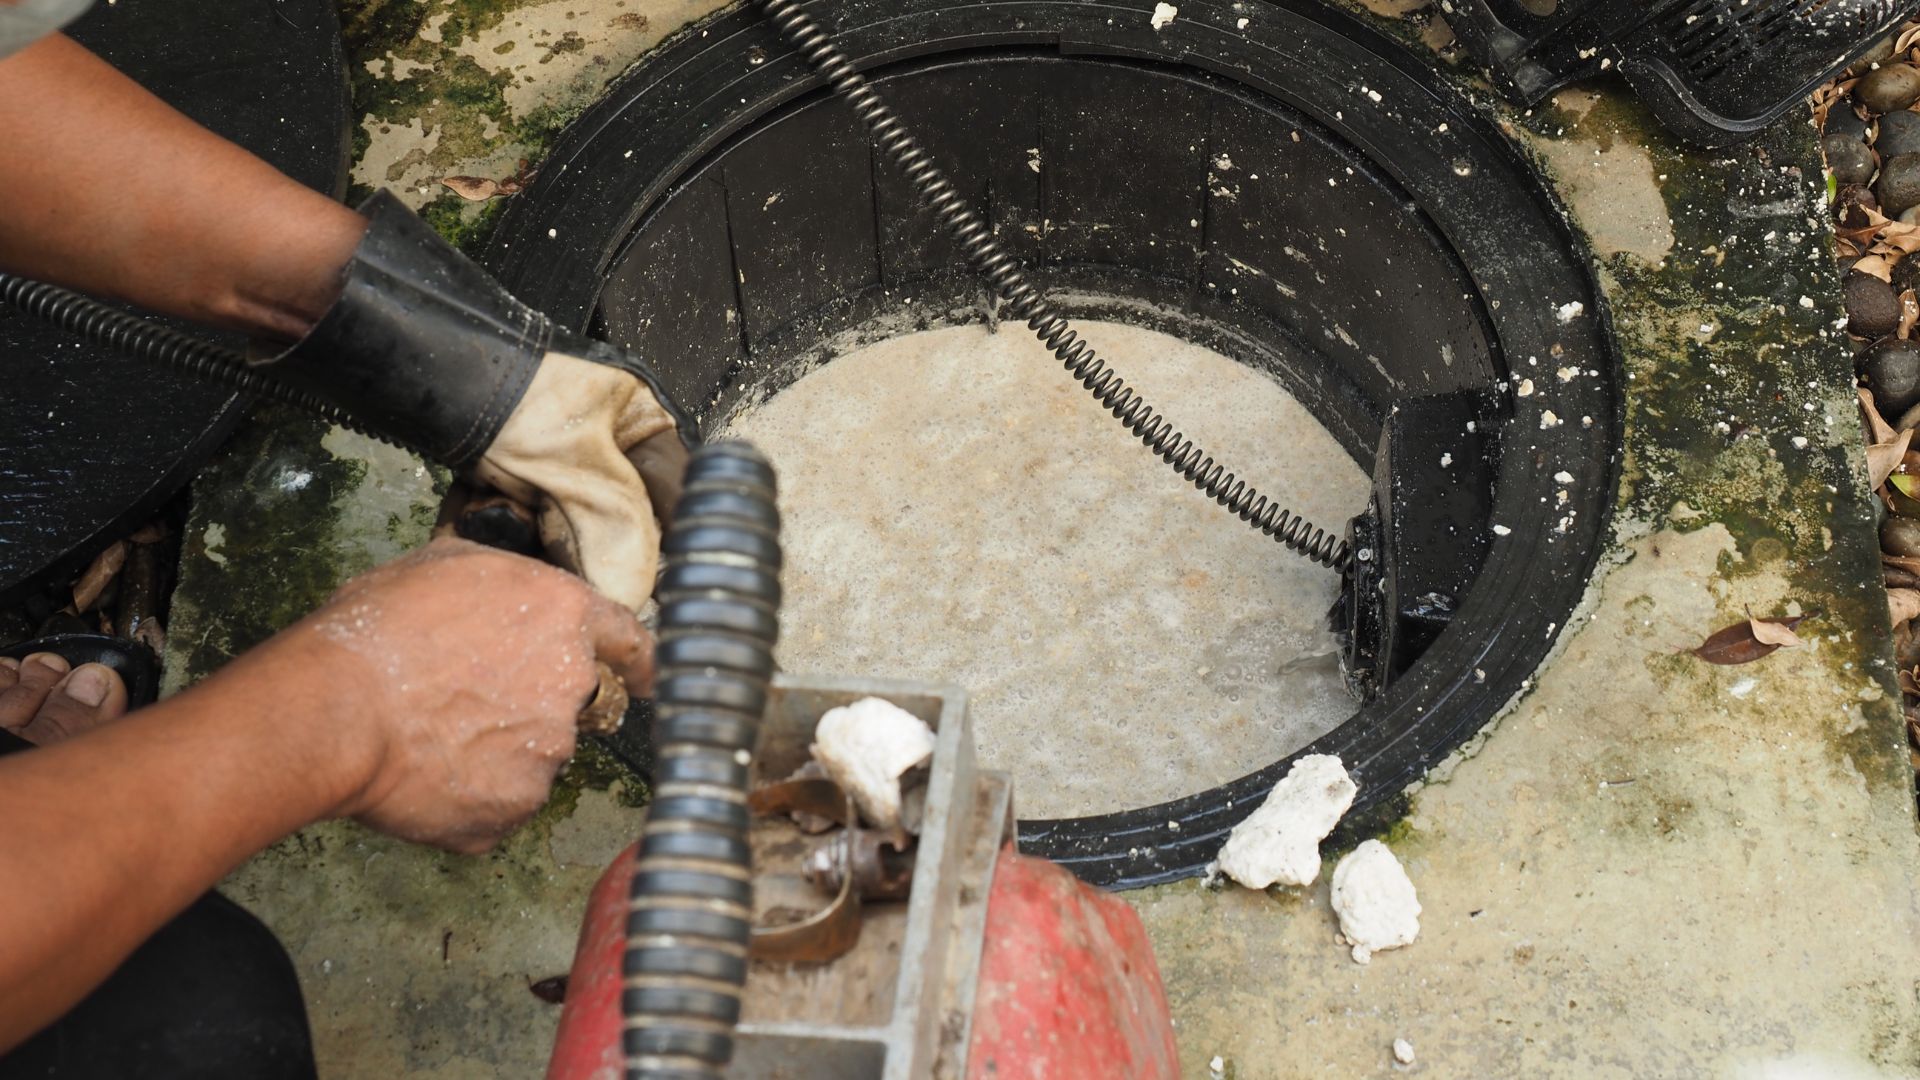 Reach out to CAN Plumbing and Drainage for any plumbing requirements, including sewer services.